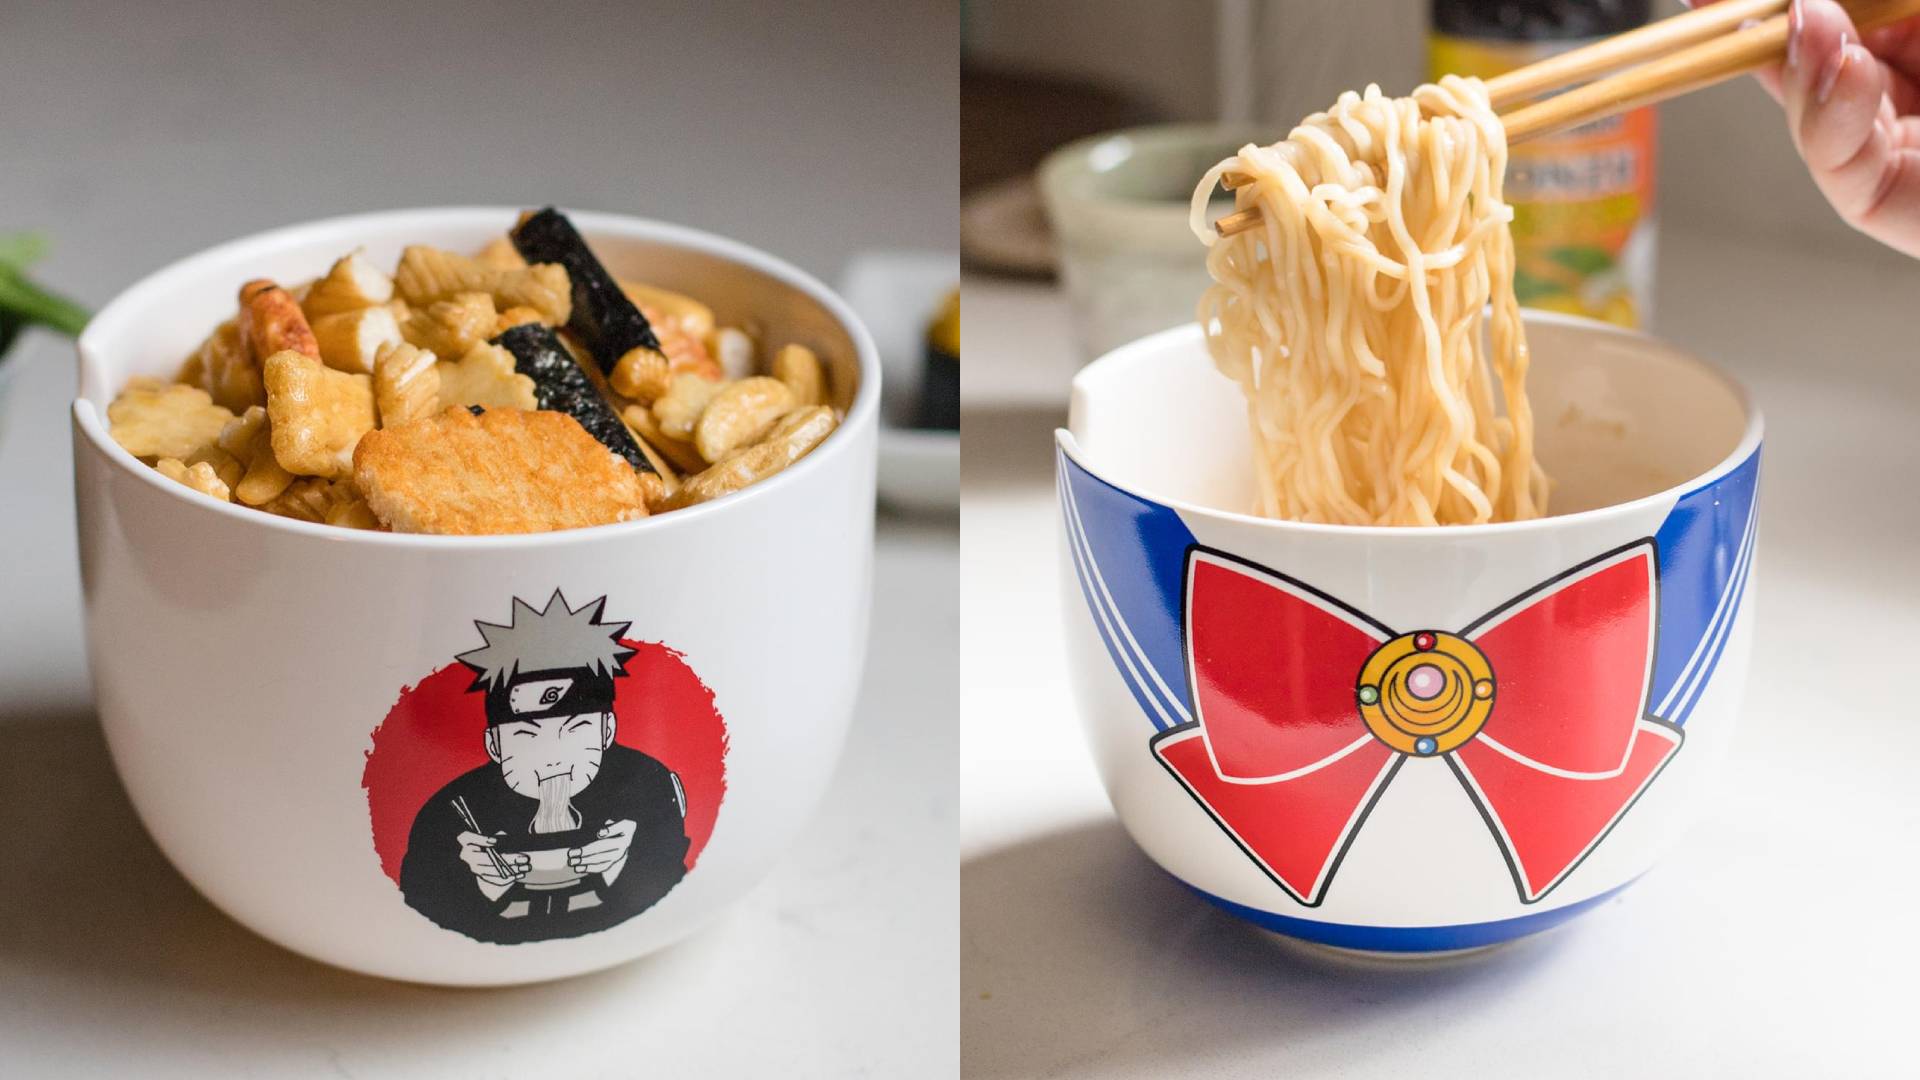 Bunny Ramen Bowl With Lid – Super Anime Store